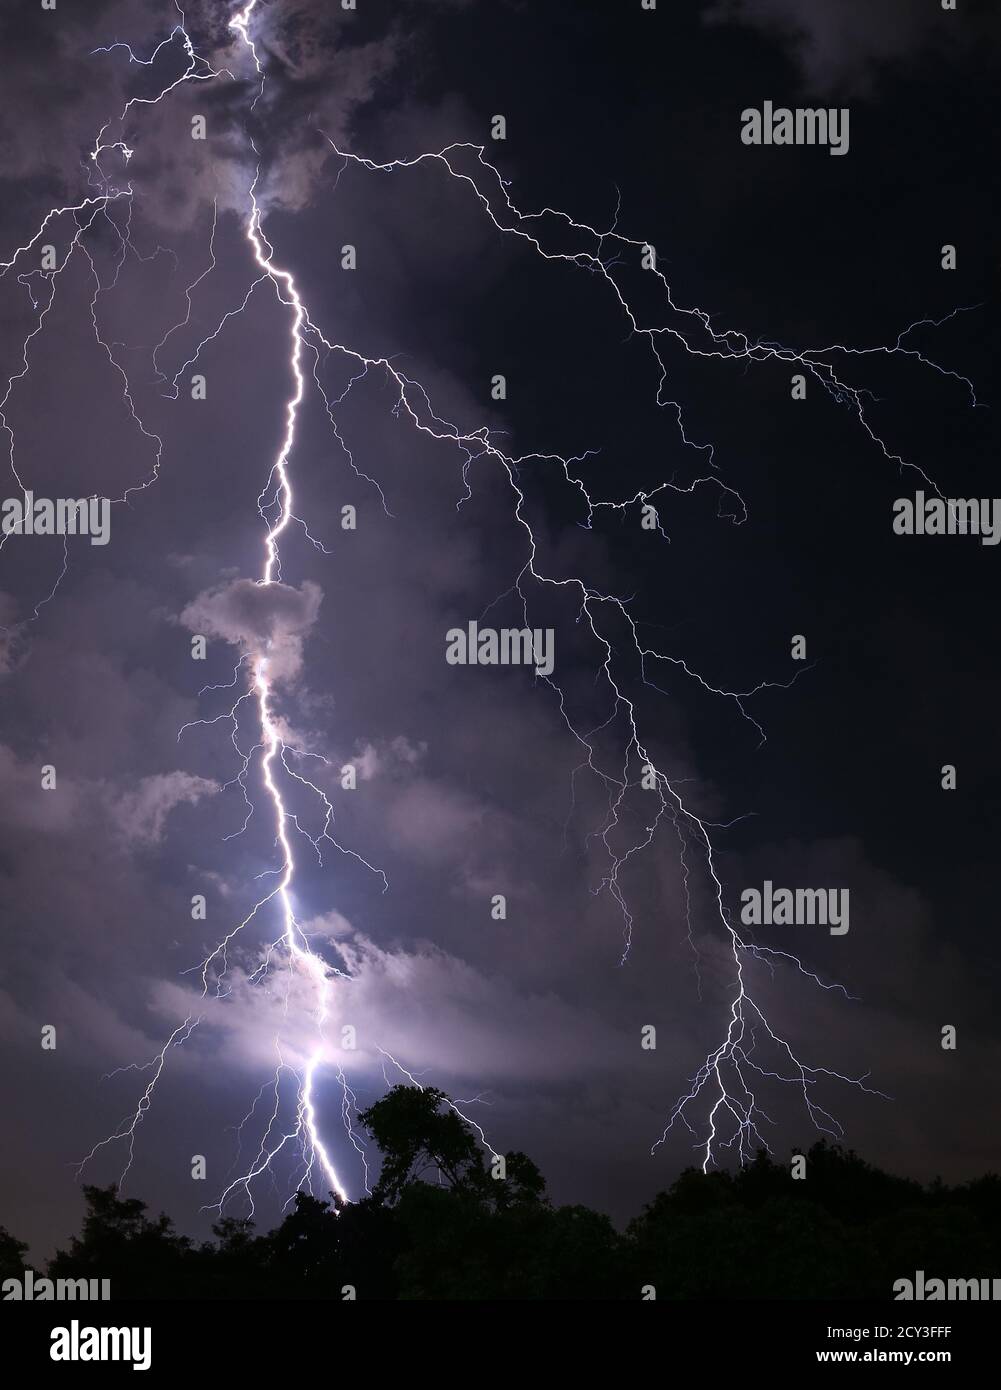 Vertical Image of Scary Real Lightning Striking over the Forest at Night Stock Photo